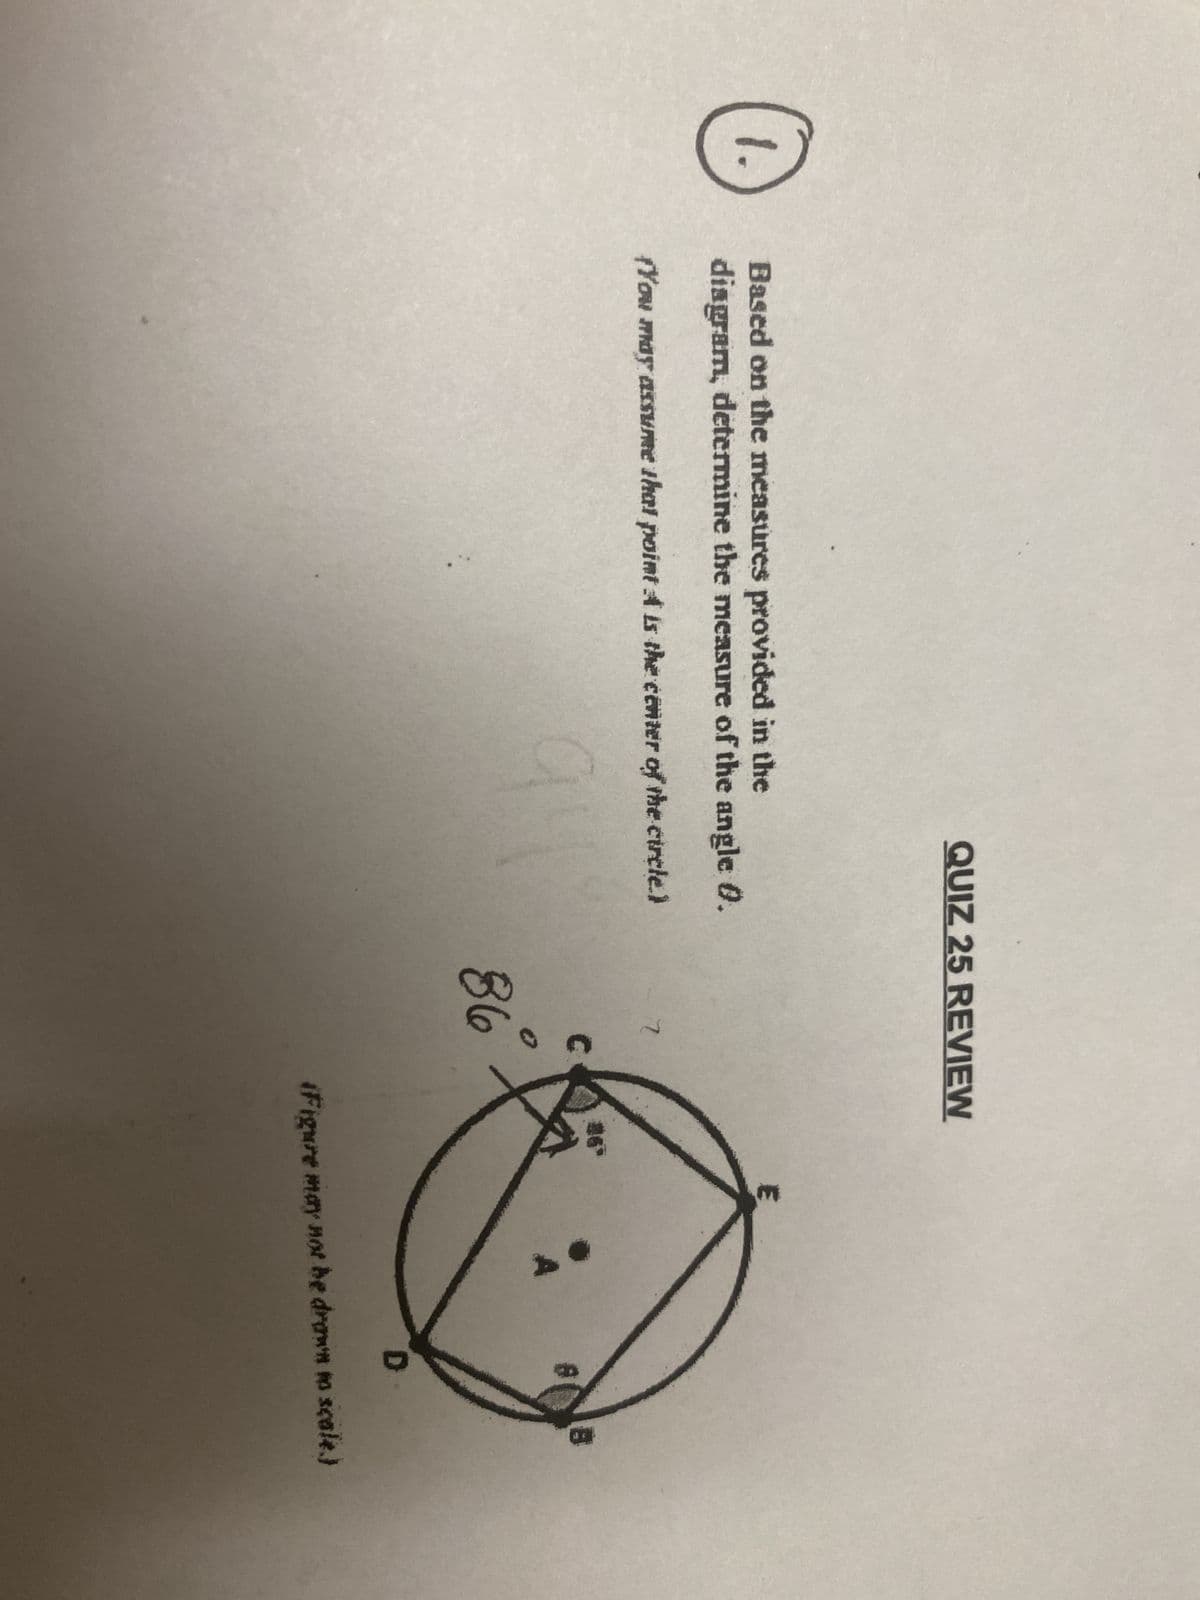 1.
QUIZ 25 REVIEW
Based on the measures provided in the
diagram, determine the measure of the angle 0.
(You may assume that point A is the center of the circle.)
7
#6°
C
B
86
D
(Figure may not be drawn to scale.)